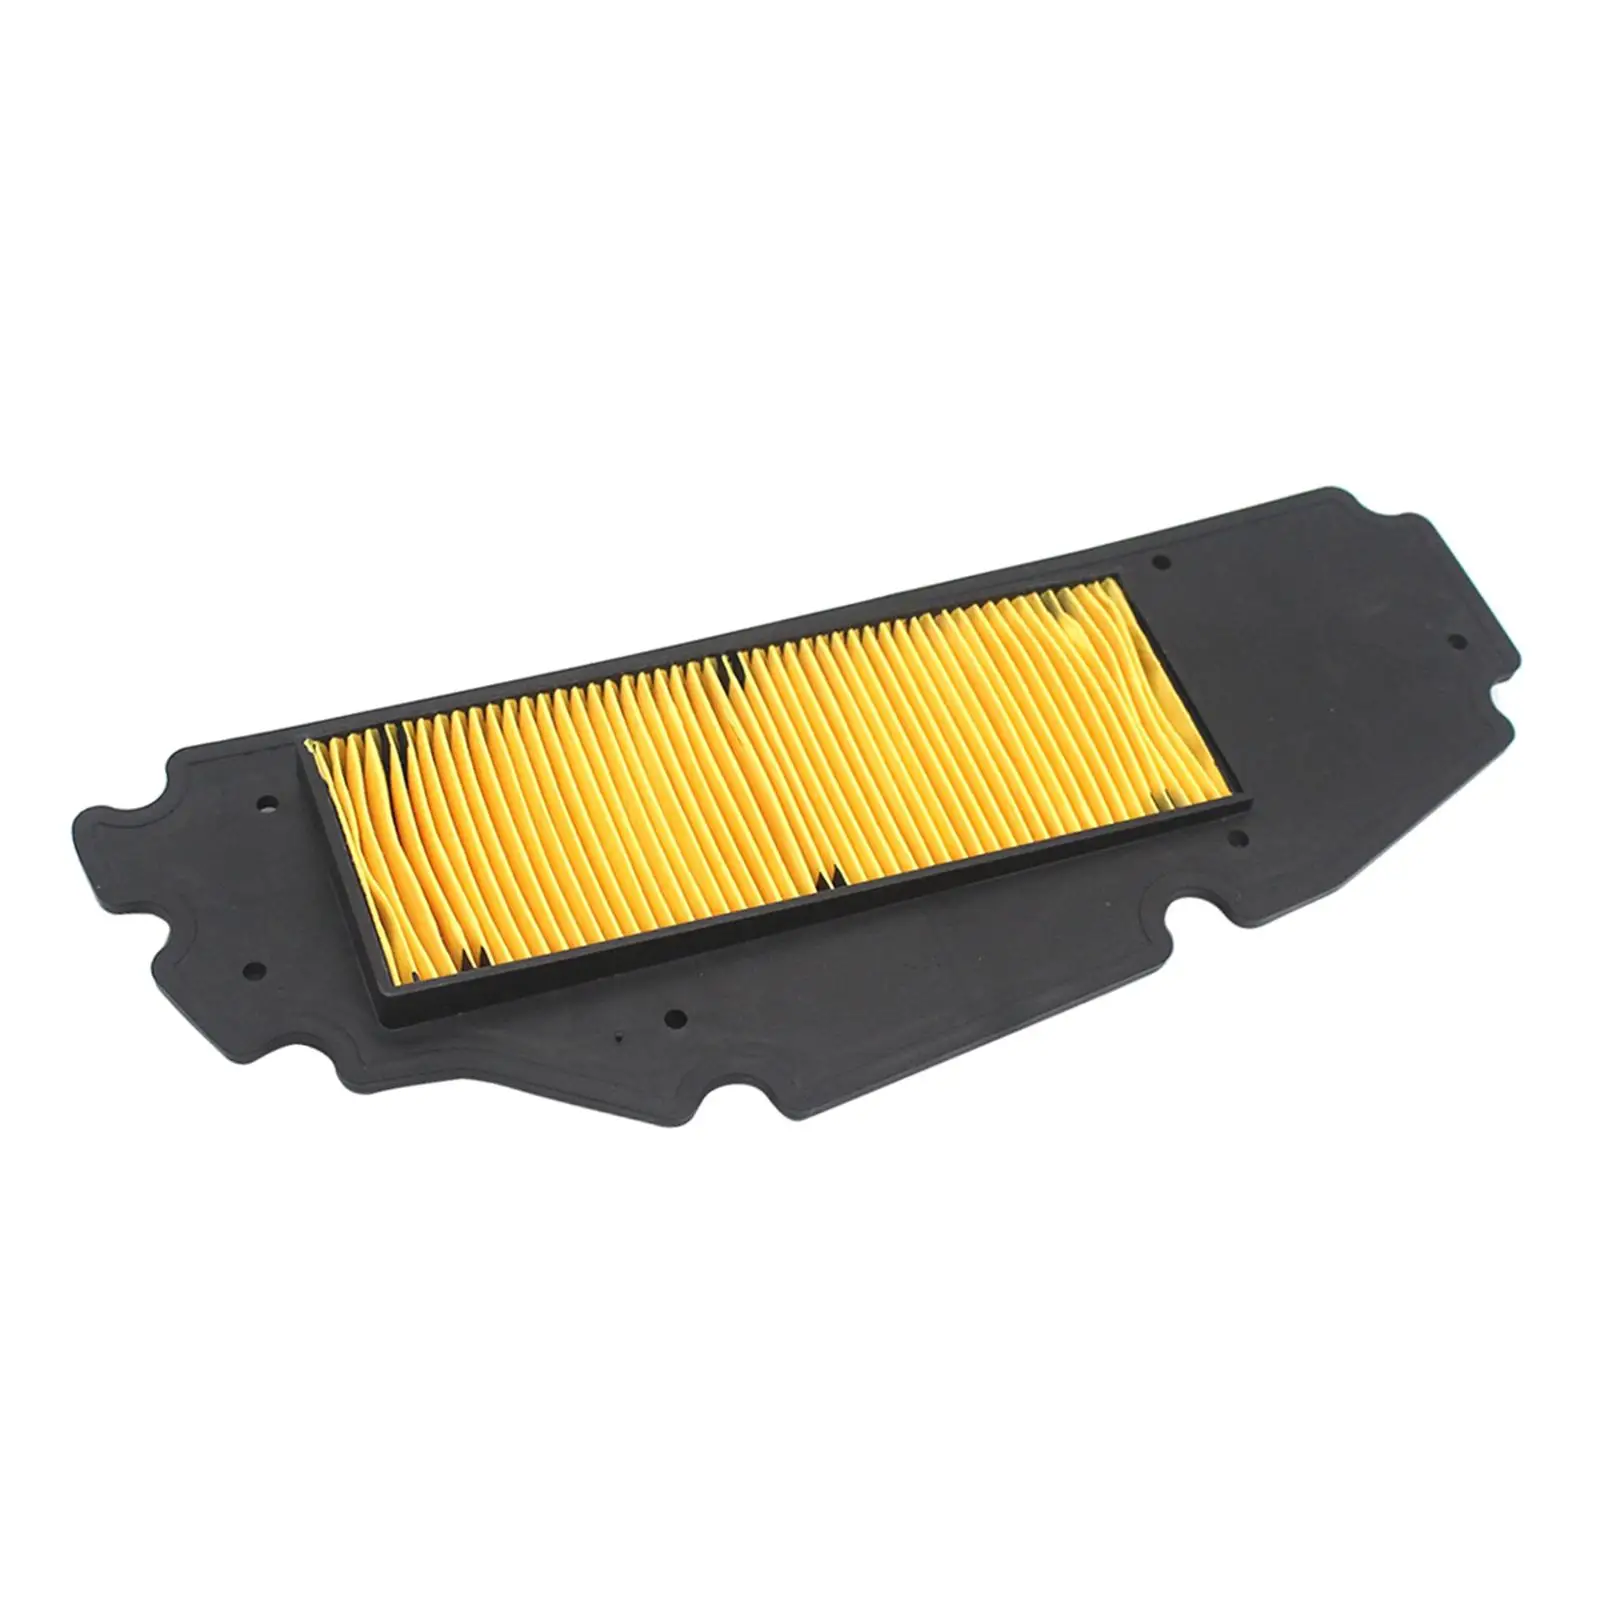 1 piece replacement filter for motorcycle filter for SYM